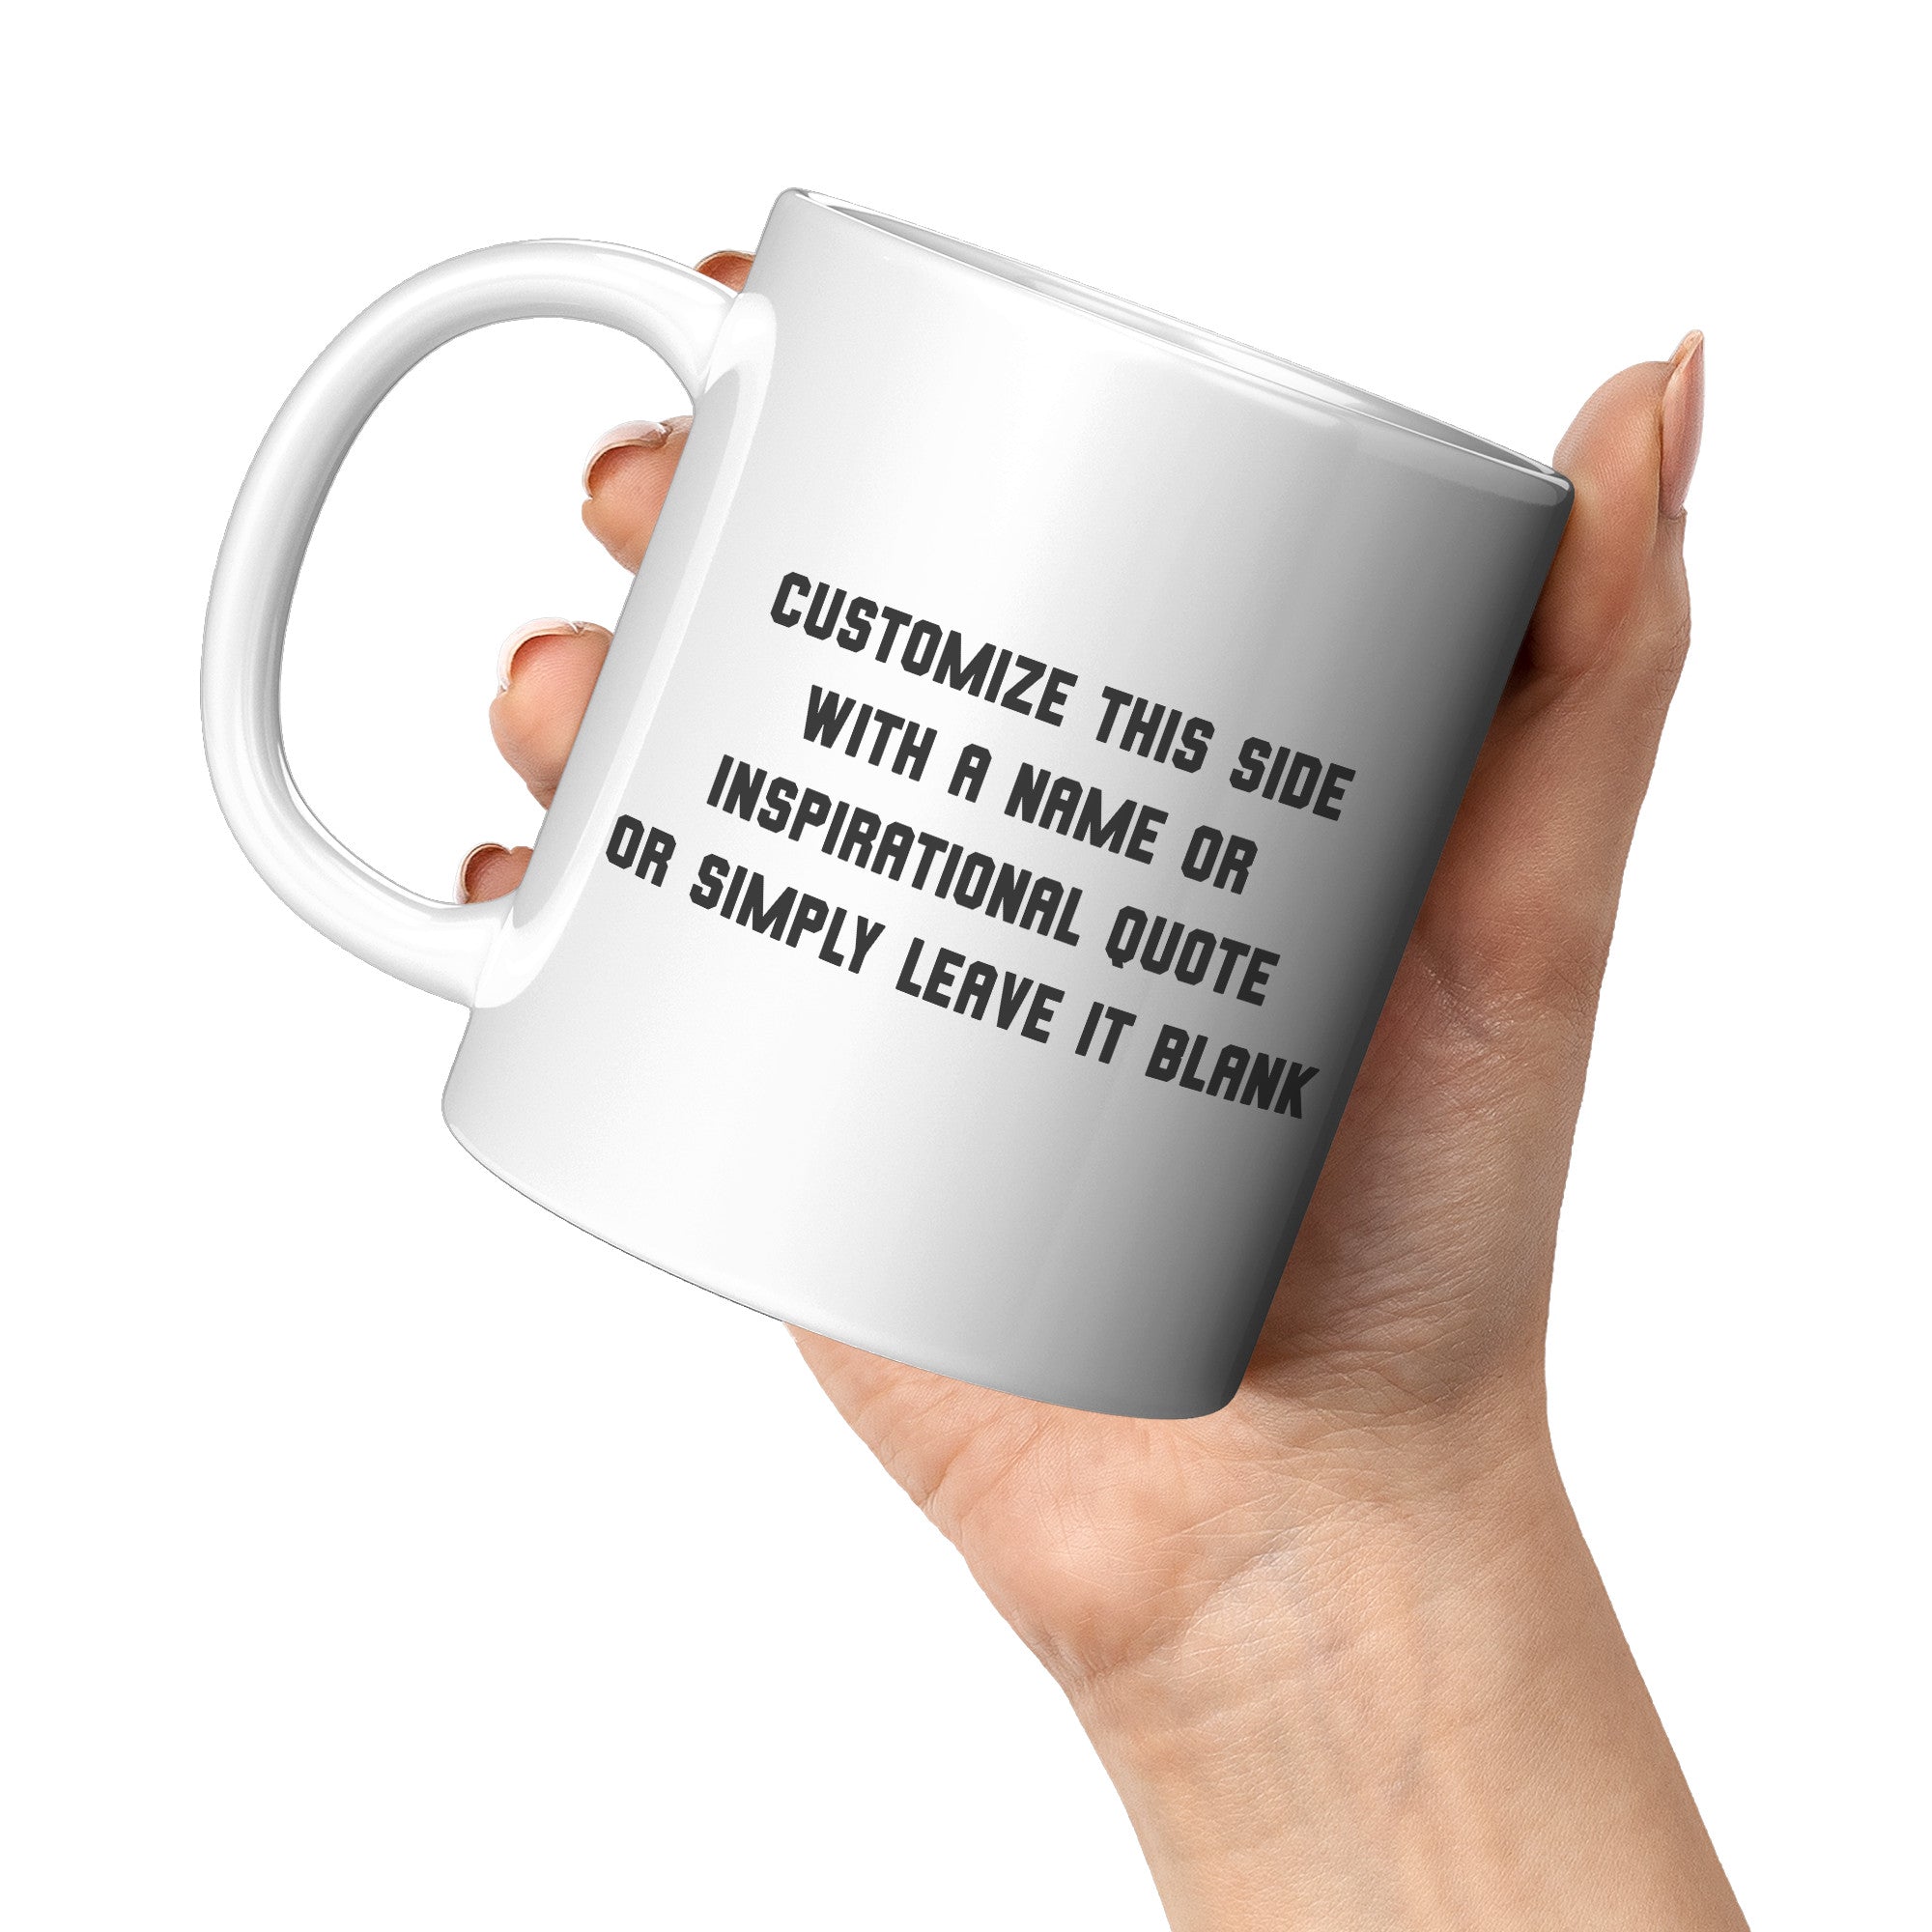 Male Runner Inspirational Mug - Motivational Running Quotes Cup - Perfect Gift for Marathon Men - Runner's Daily Dose of Determination - E